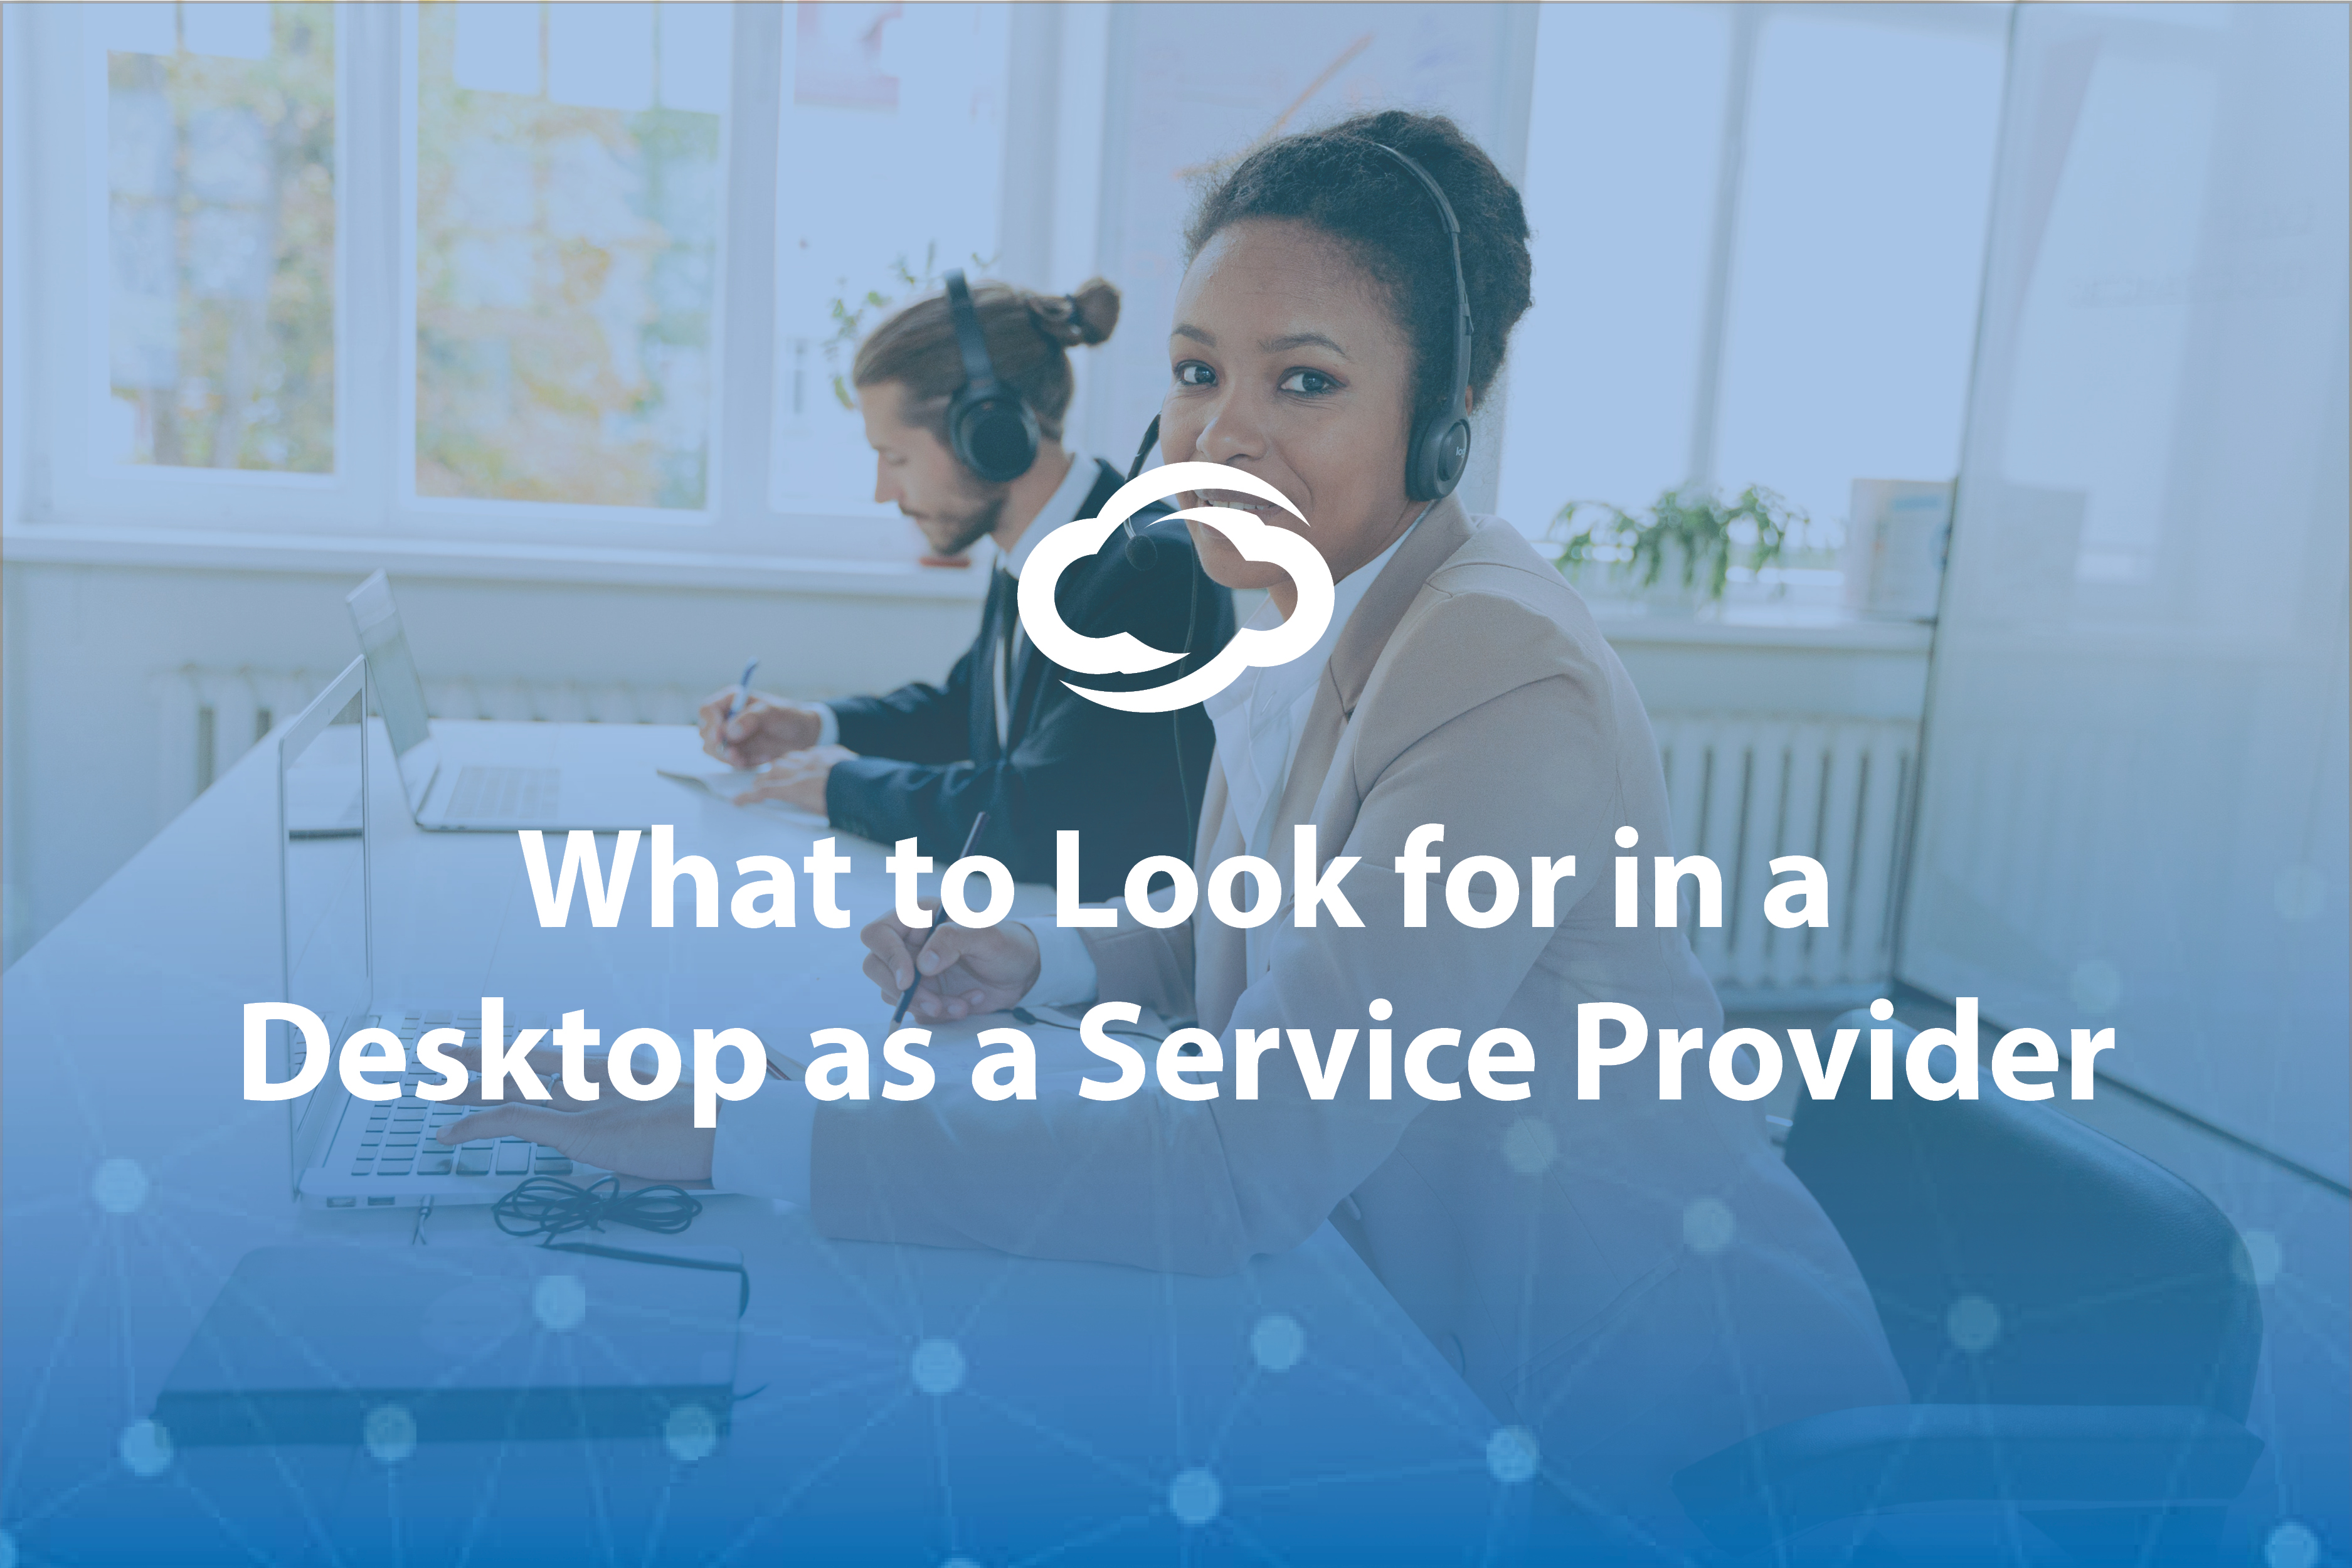 Blog Image - What to look for in a Desktop as a Service Provider